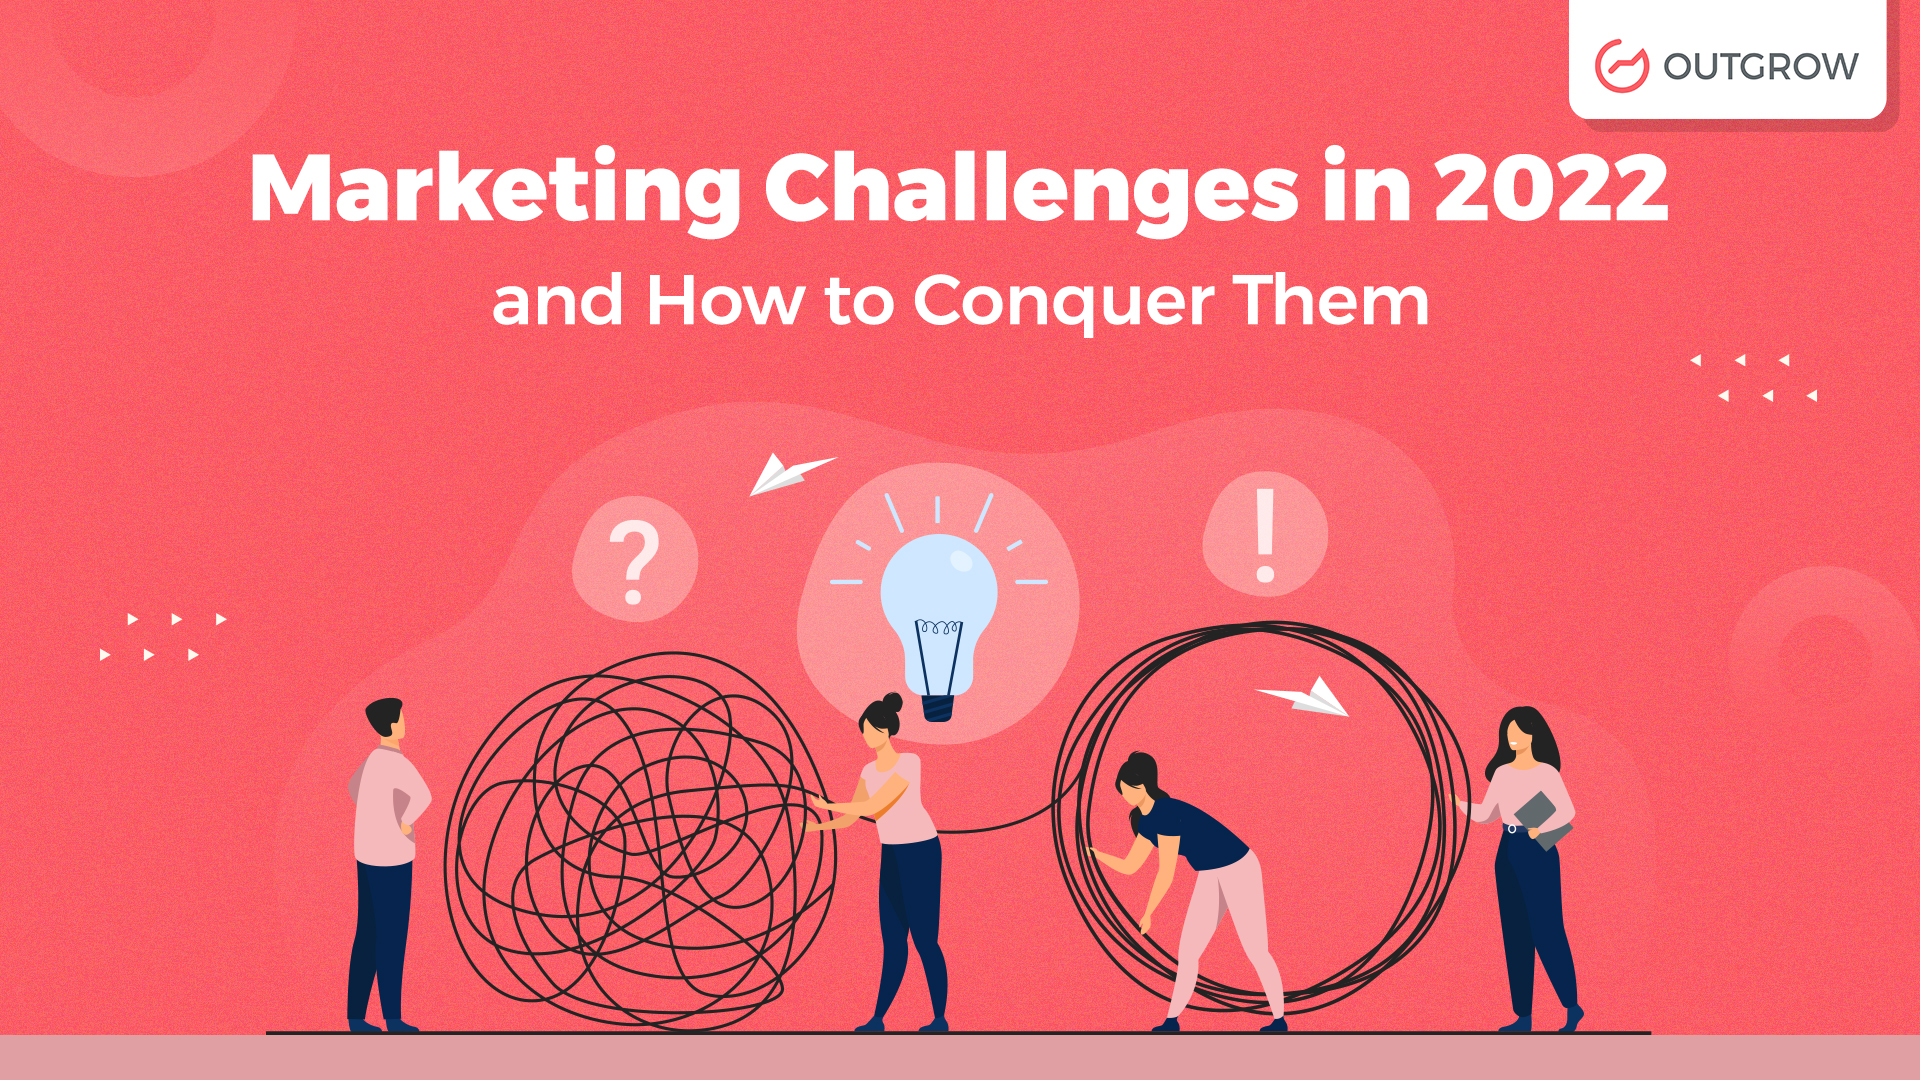 How to conquer marketing challenges in 2022